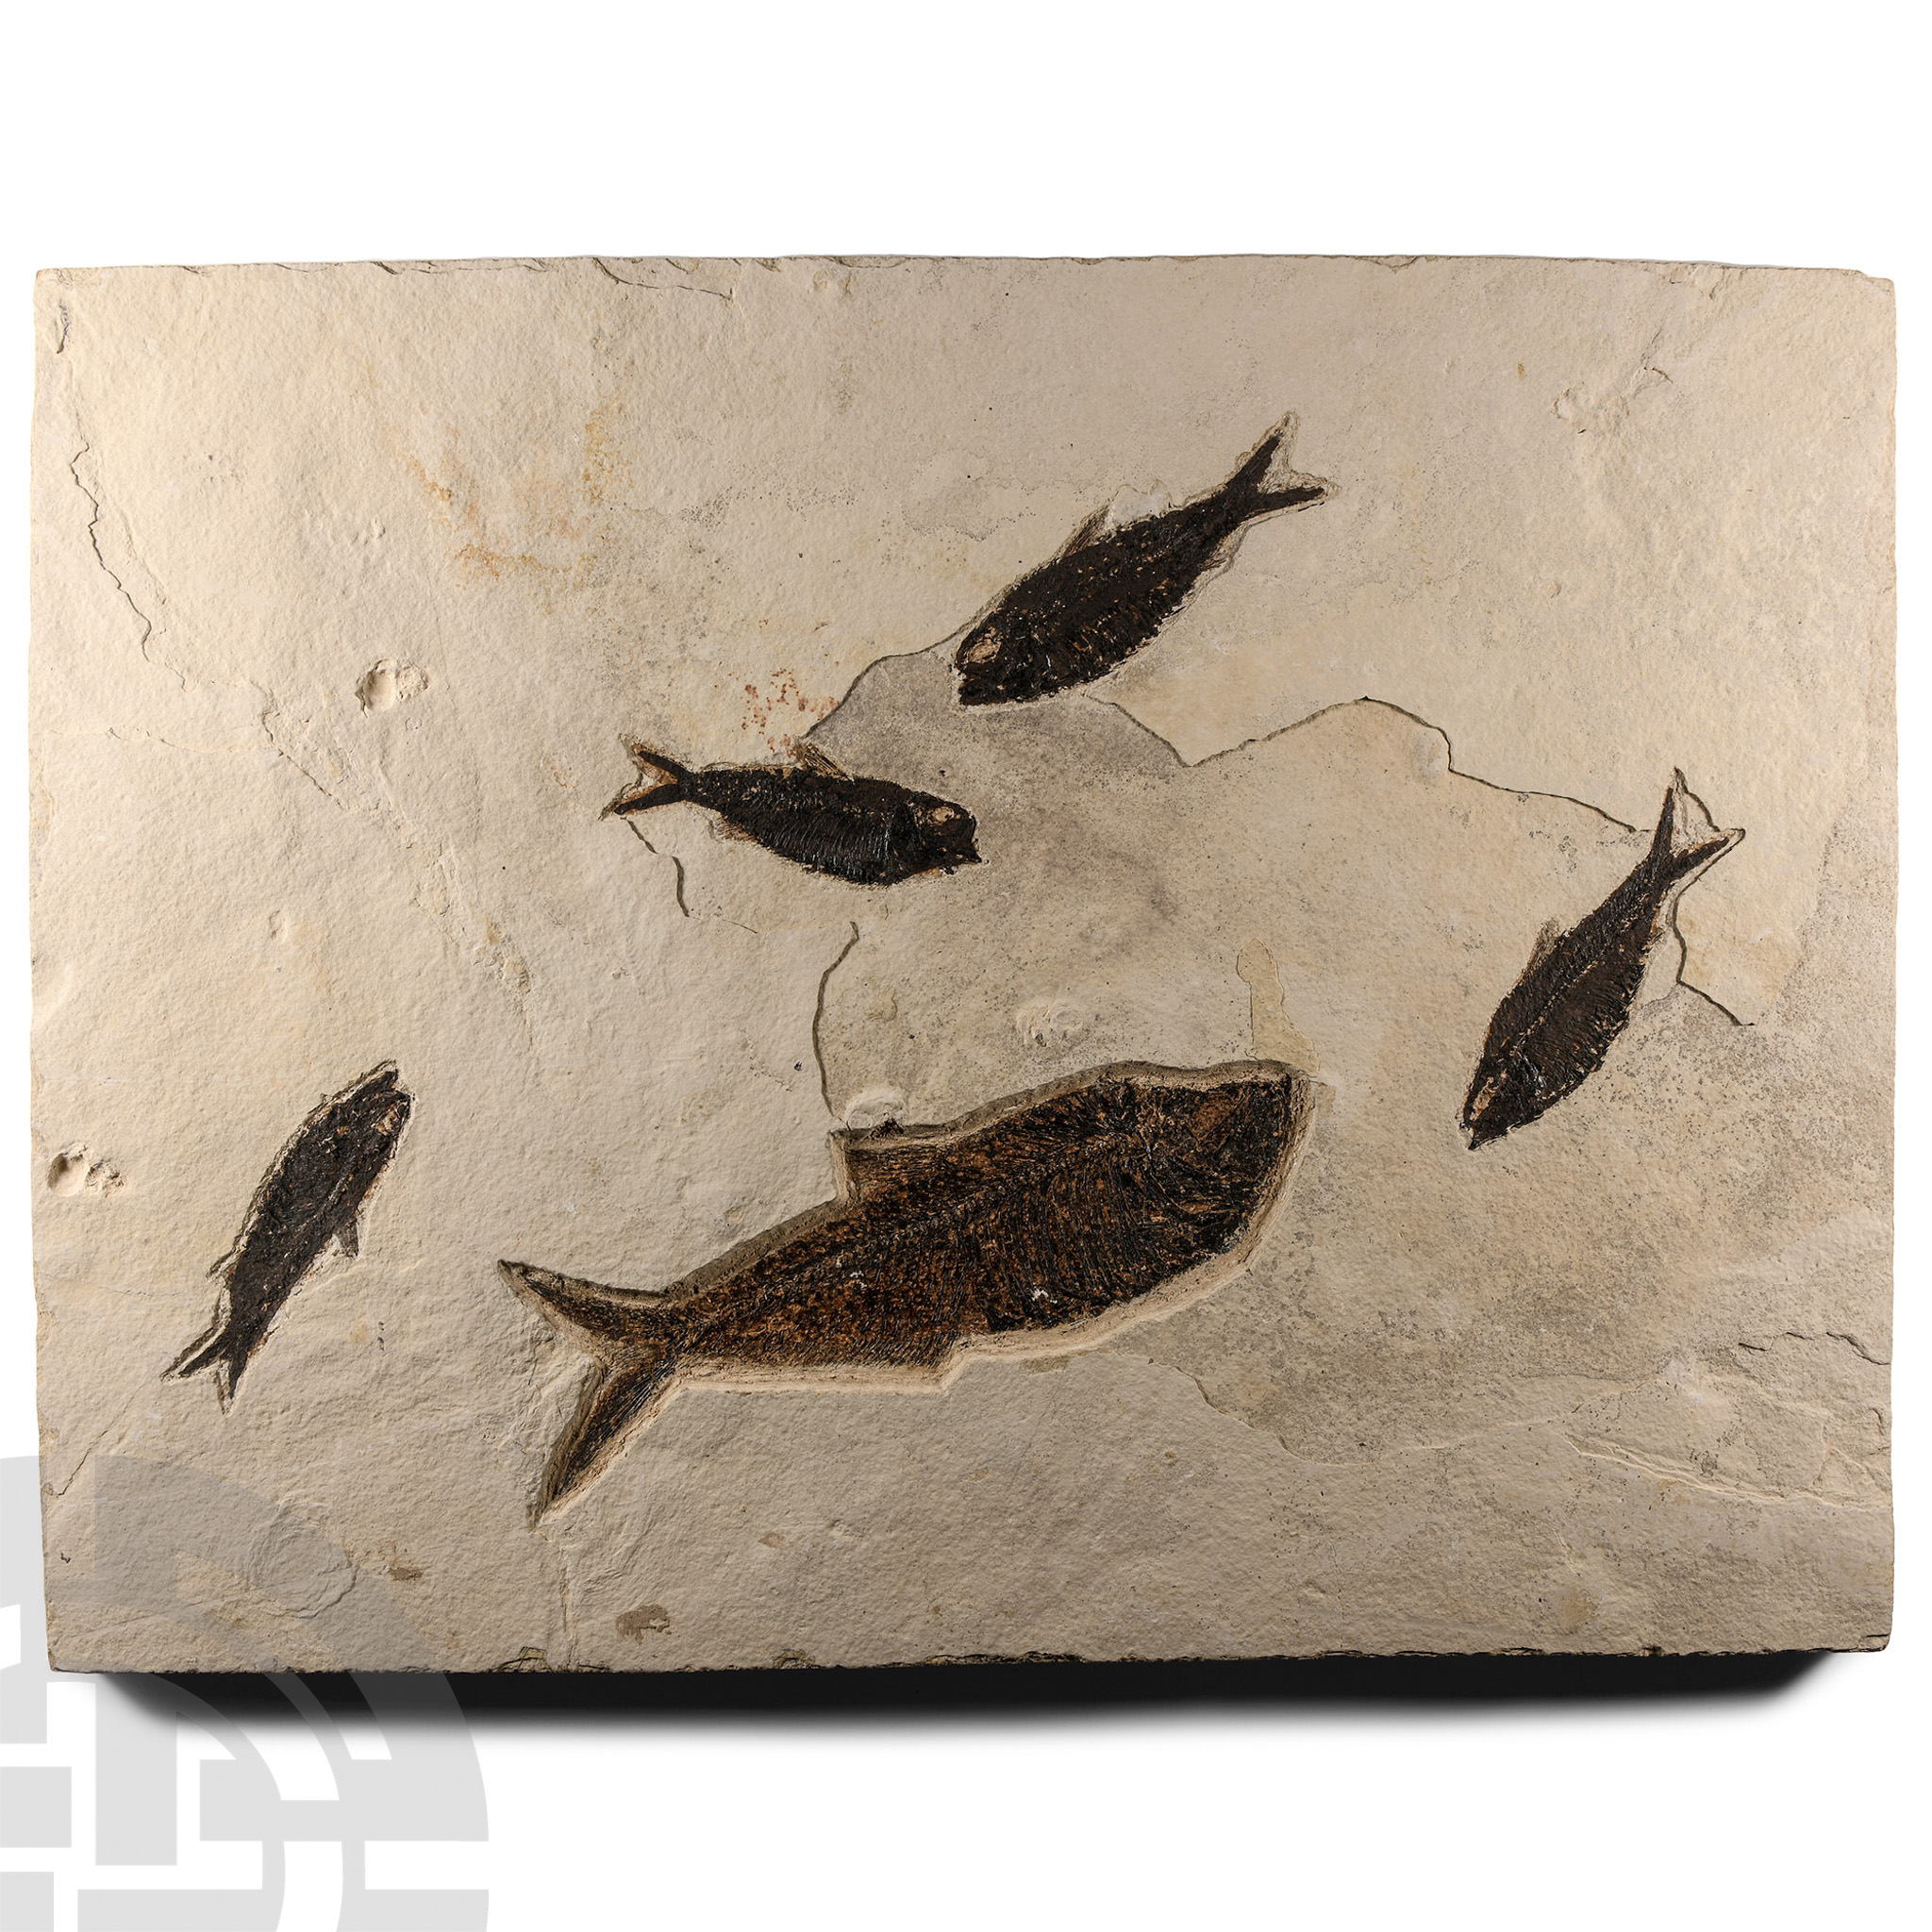 Natural History - Large Fossil Fish Plate